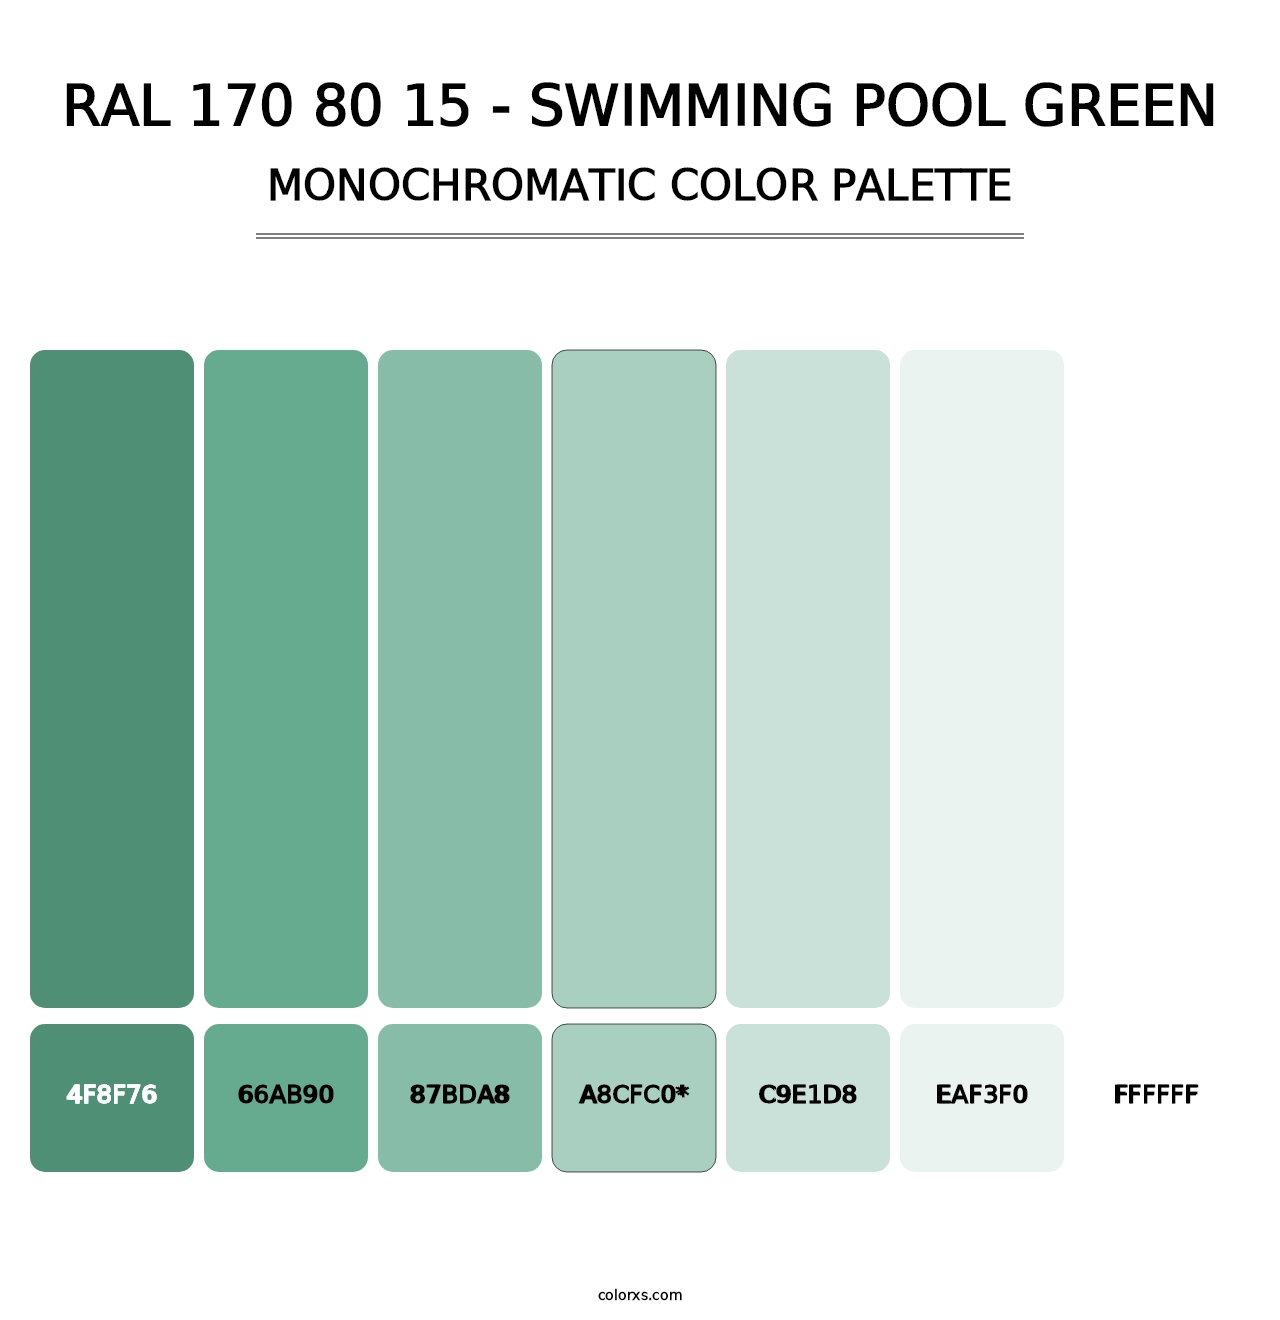 RAL 170 80 15 - Swimming Pool Green - Monochromatic Color Palette